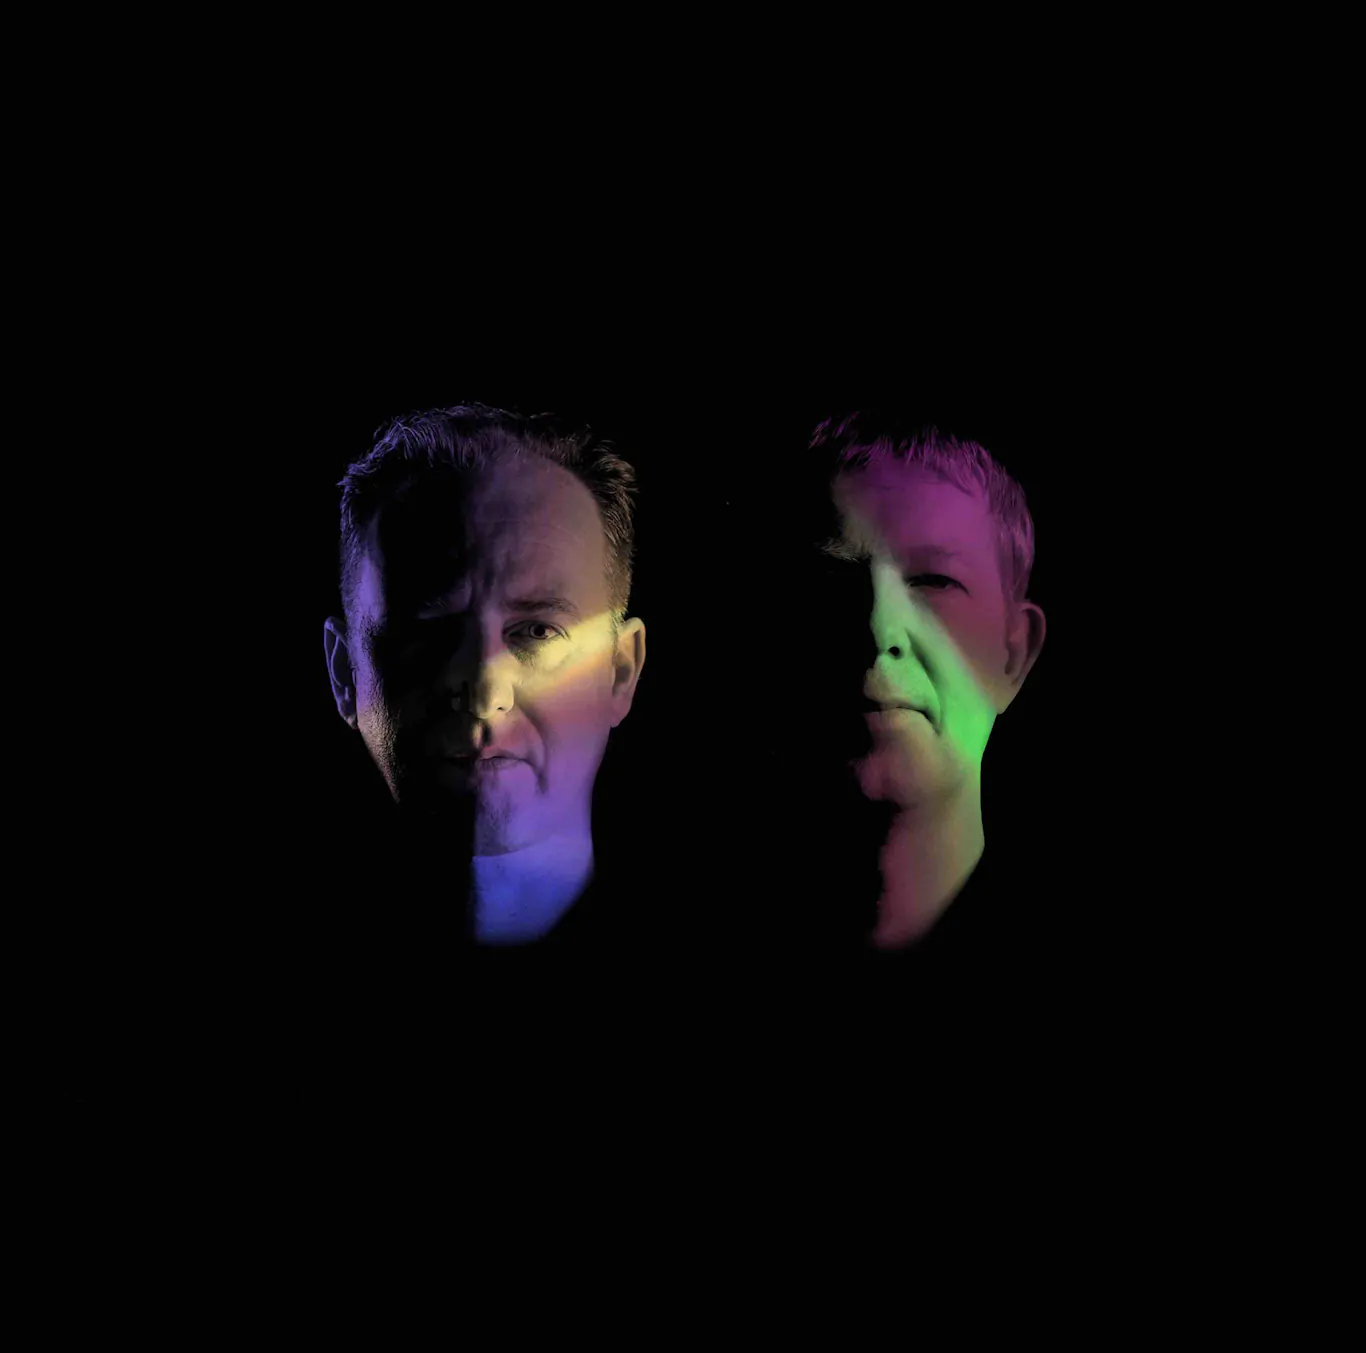 SASHA & JOHN DIGWEED are back in Belfast to headline The Telegraph Building on Saturday, 8th April 2023